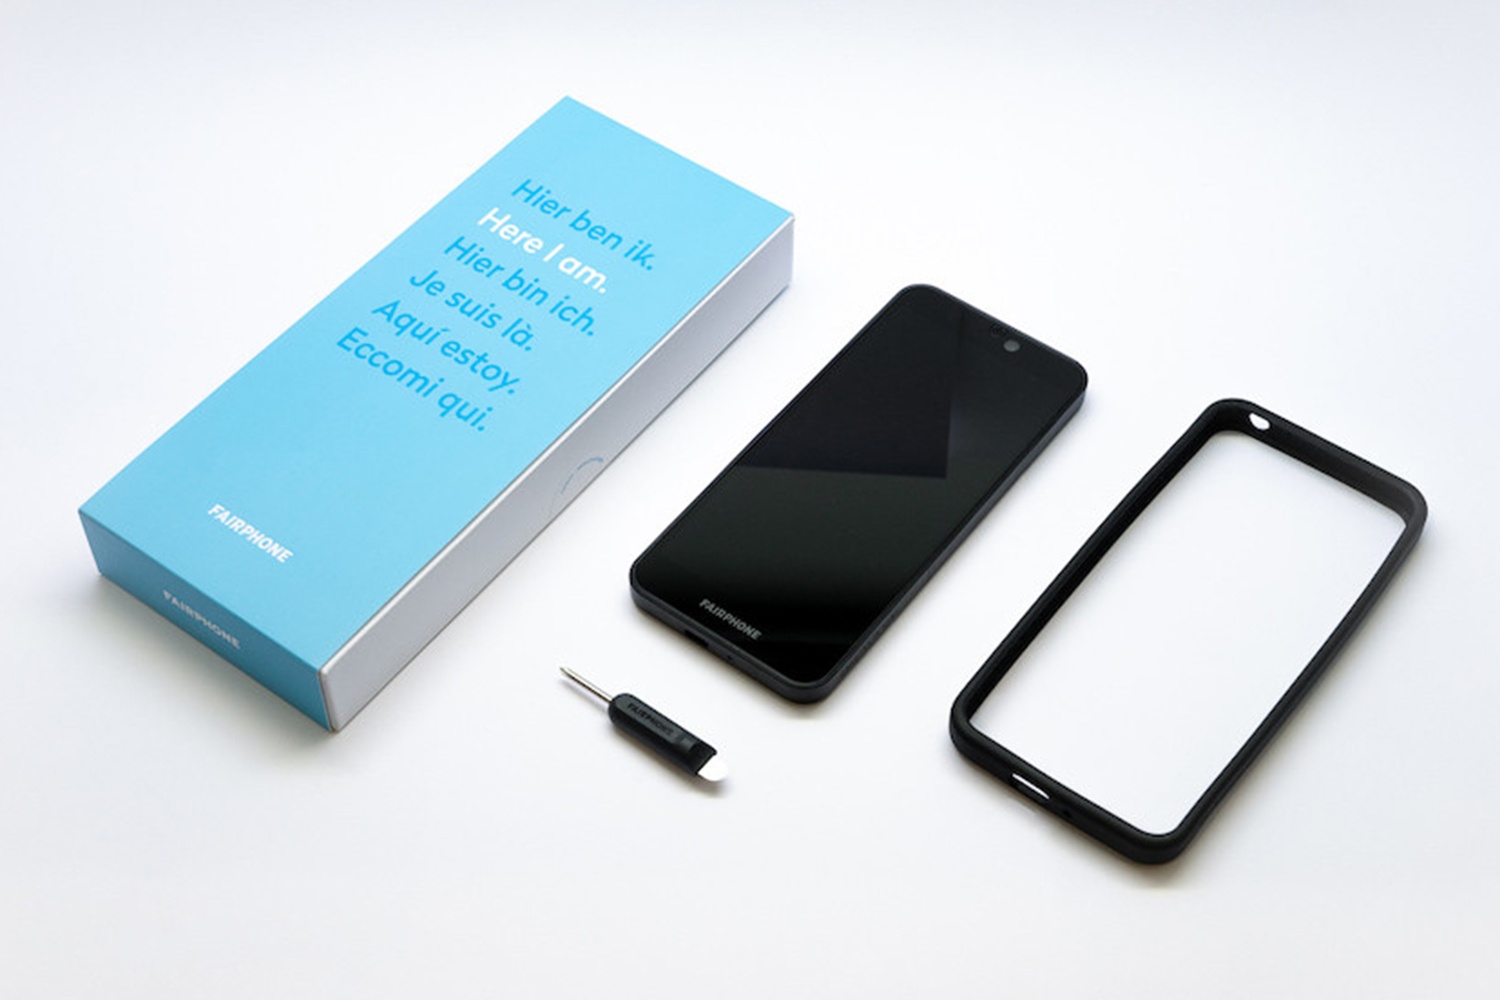 The Fairphone 3 packaged the change with a screwdriver and extra protection